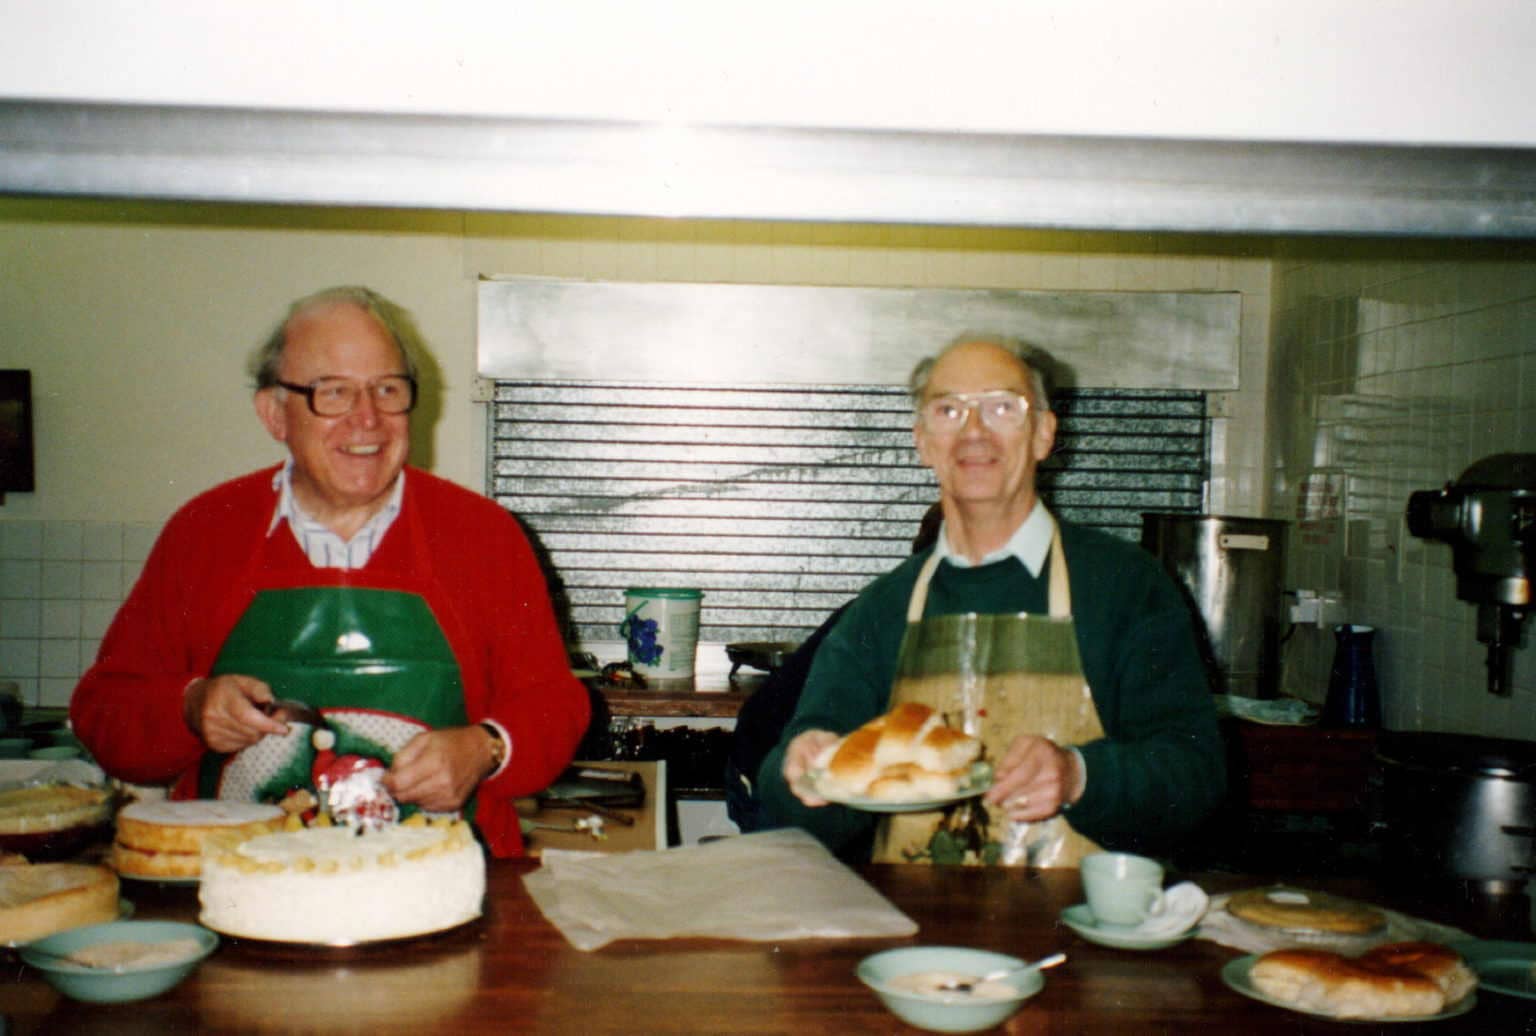 colour photo of two middle aged white men wearing glasses and smiling. They are in a kitchen with cakes.